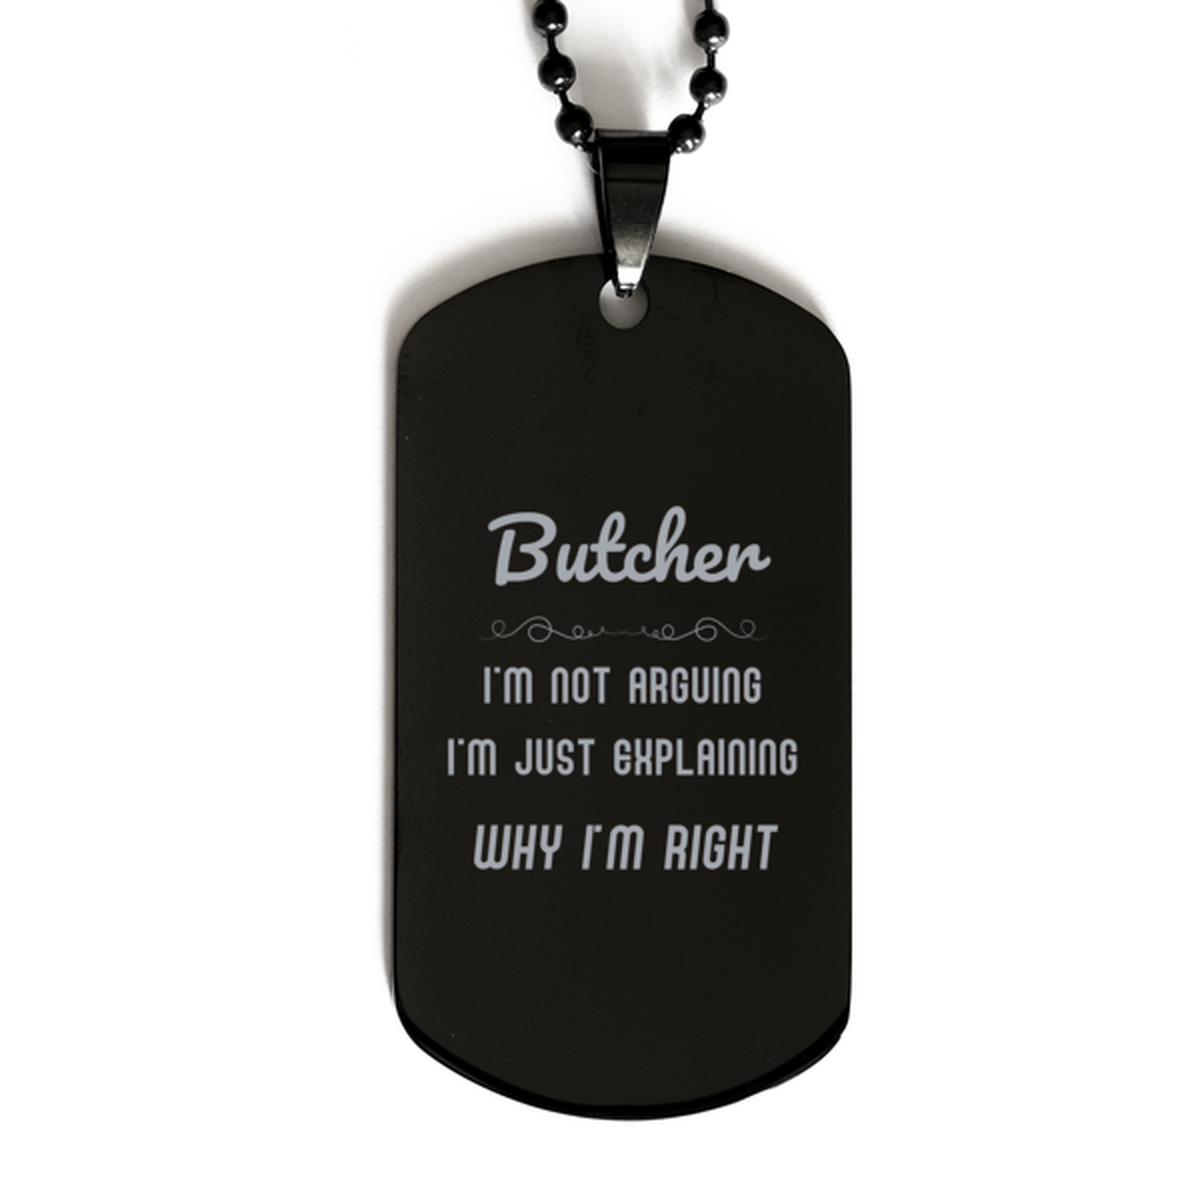 Butcher I'm not Arguing. I'm Just Explaining Why I'm RIGHT Black Dog Tag, Funny Saying Quote Butcher Gifts For Butcher Graduation Birthday Christmas Gifts for Men Women Coworker